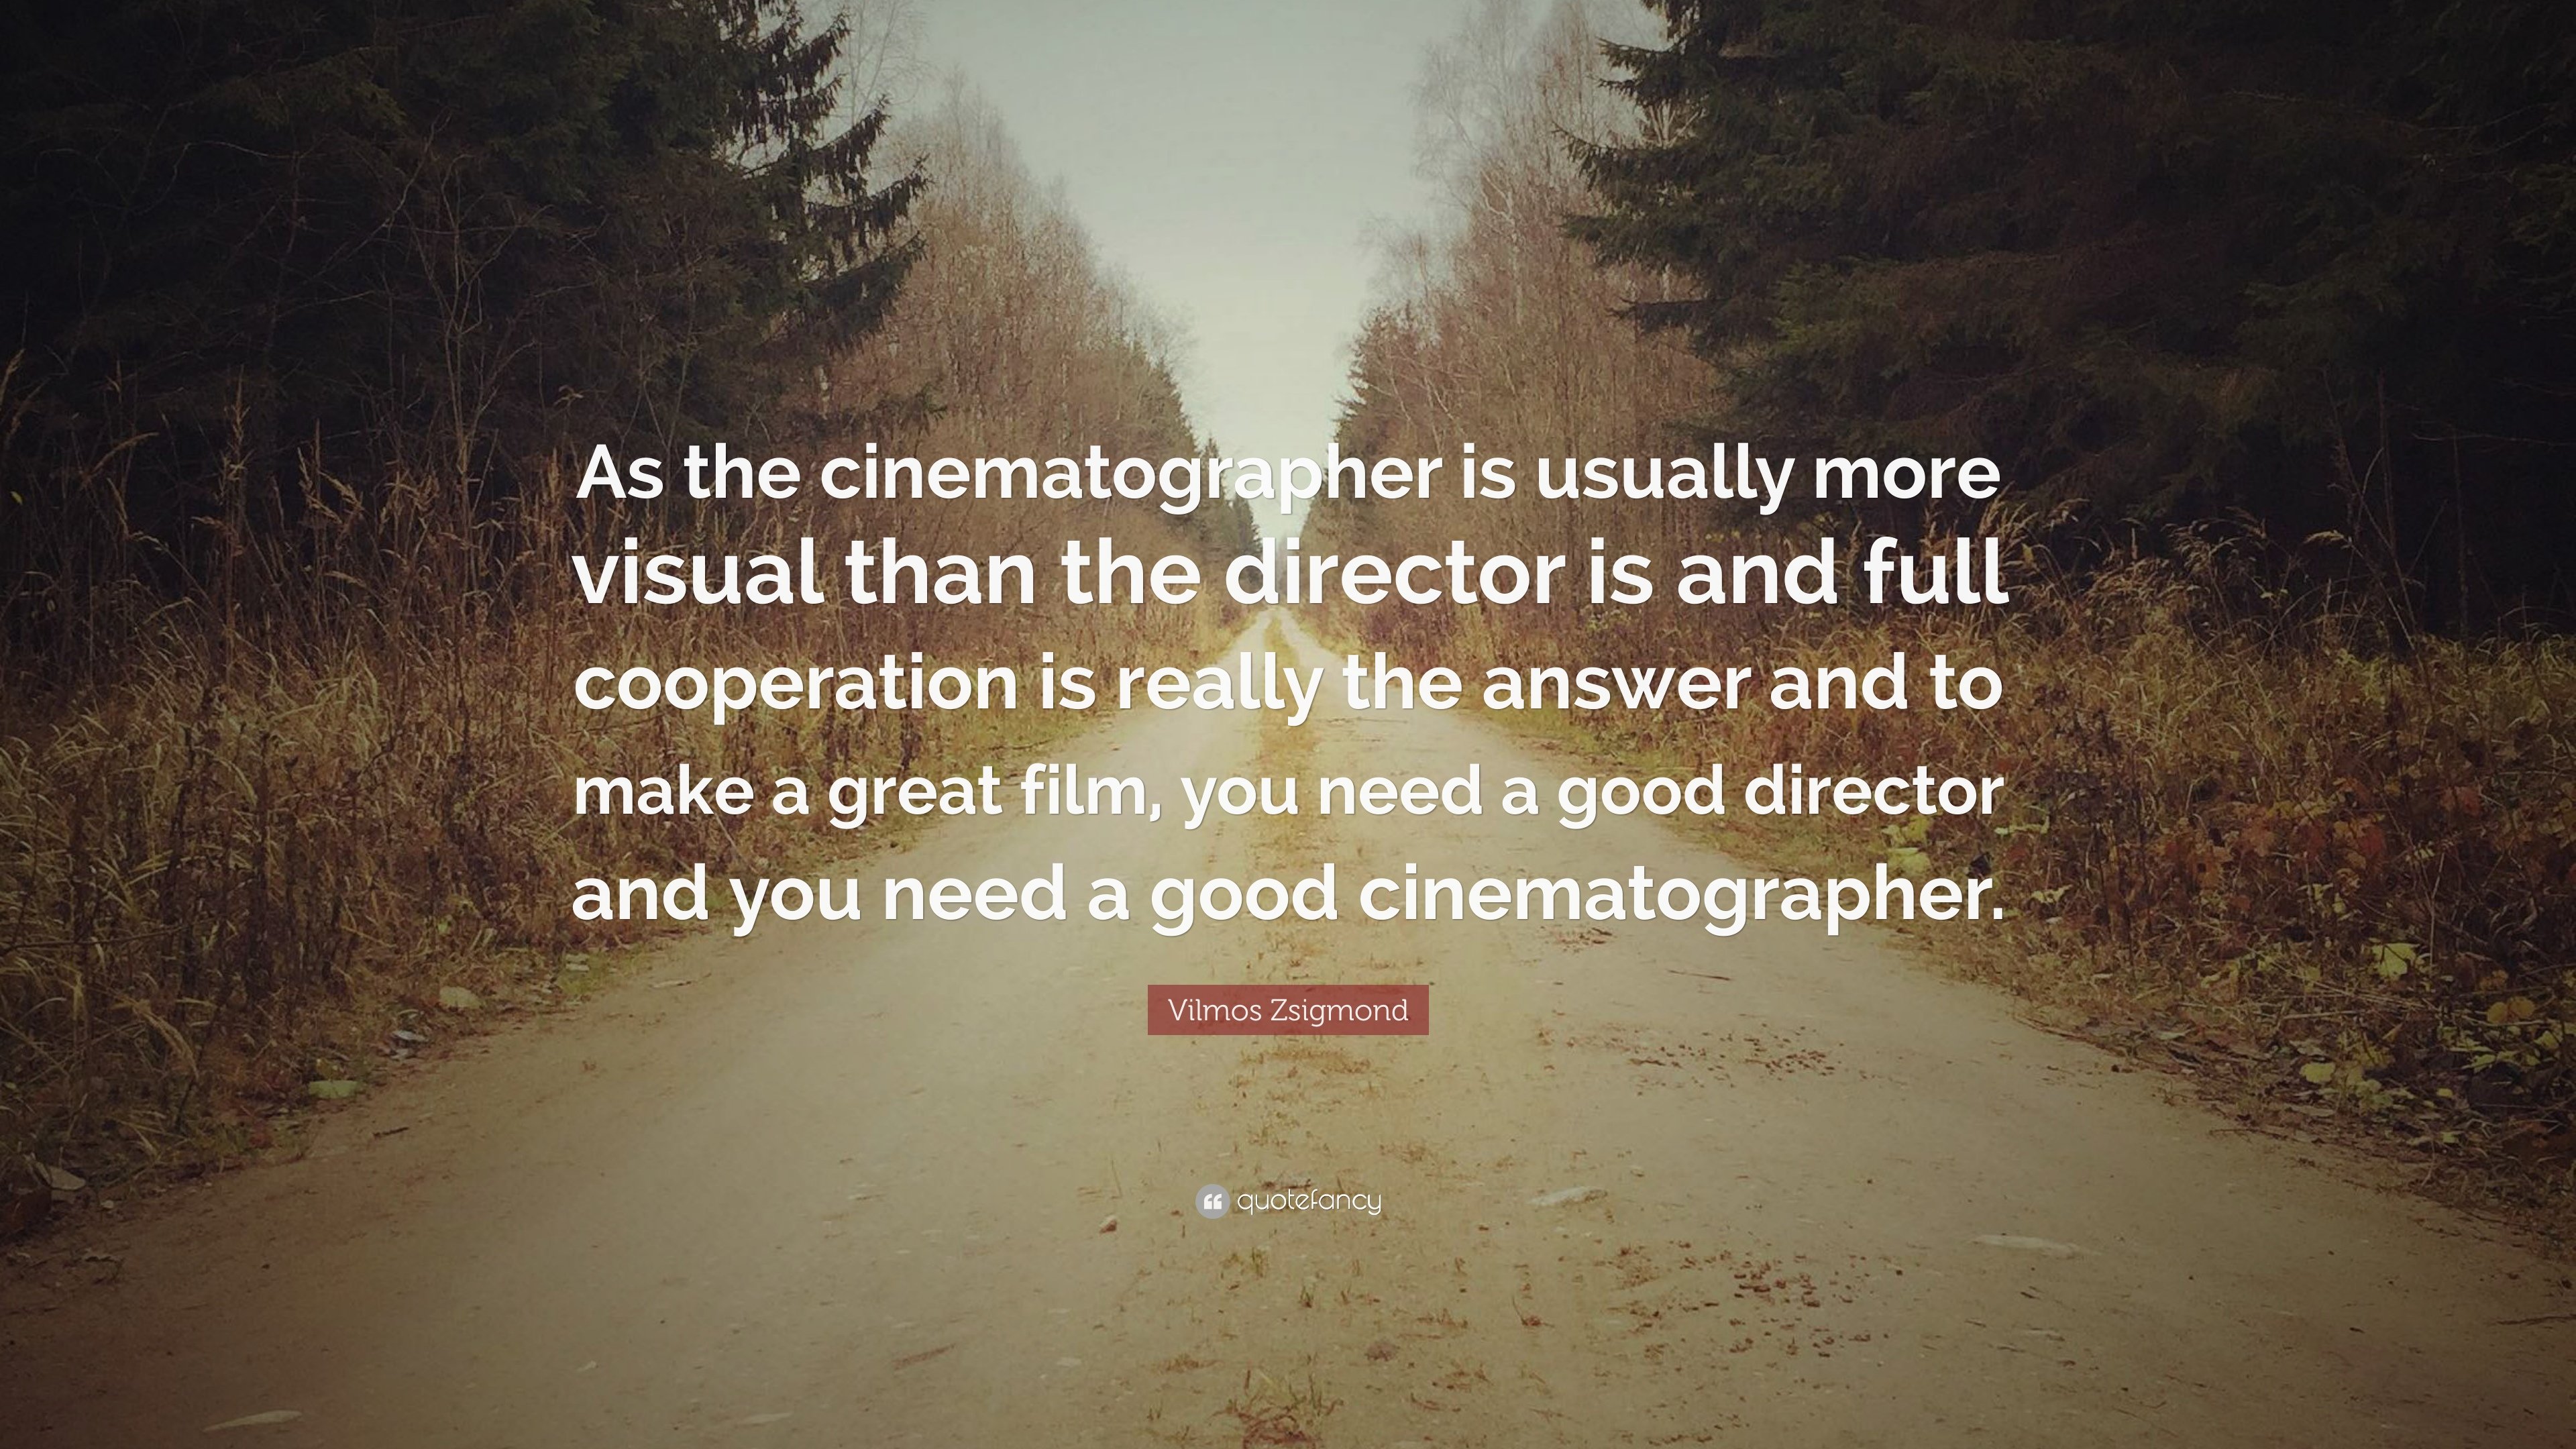 Vilmos Zsigmond Quote: “As the cinematographer is usually